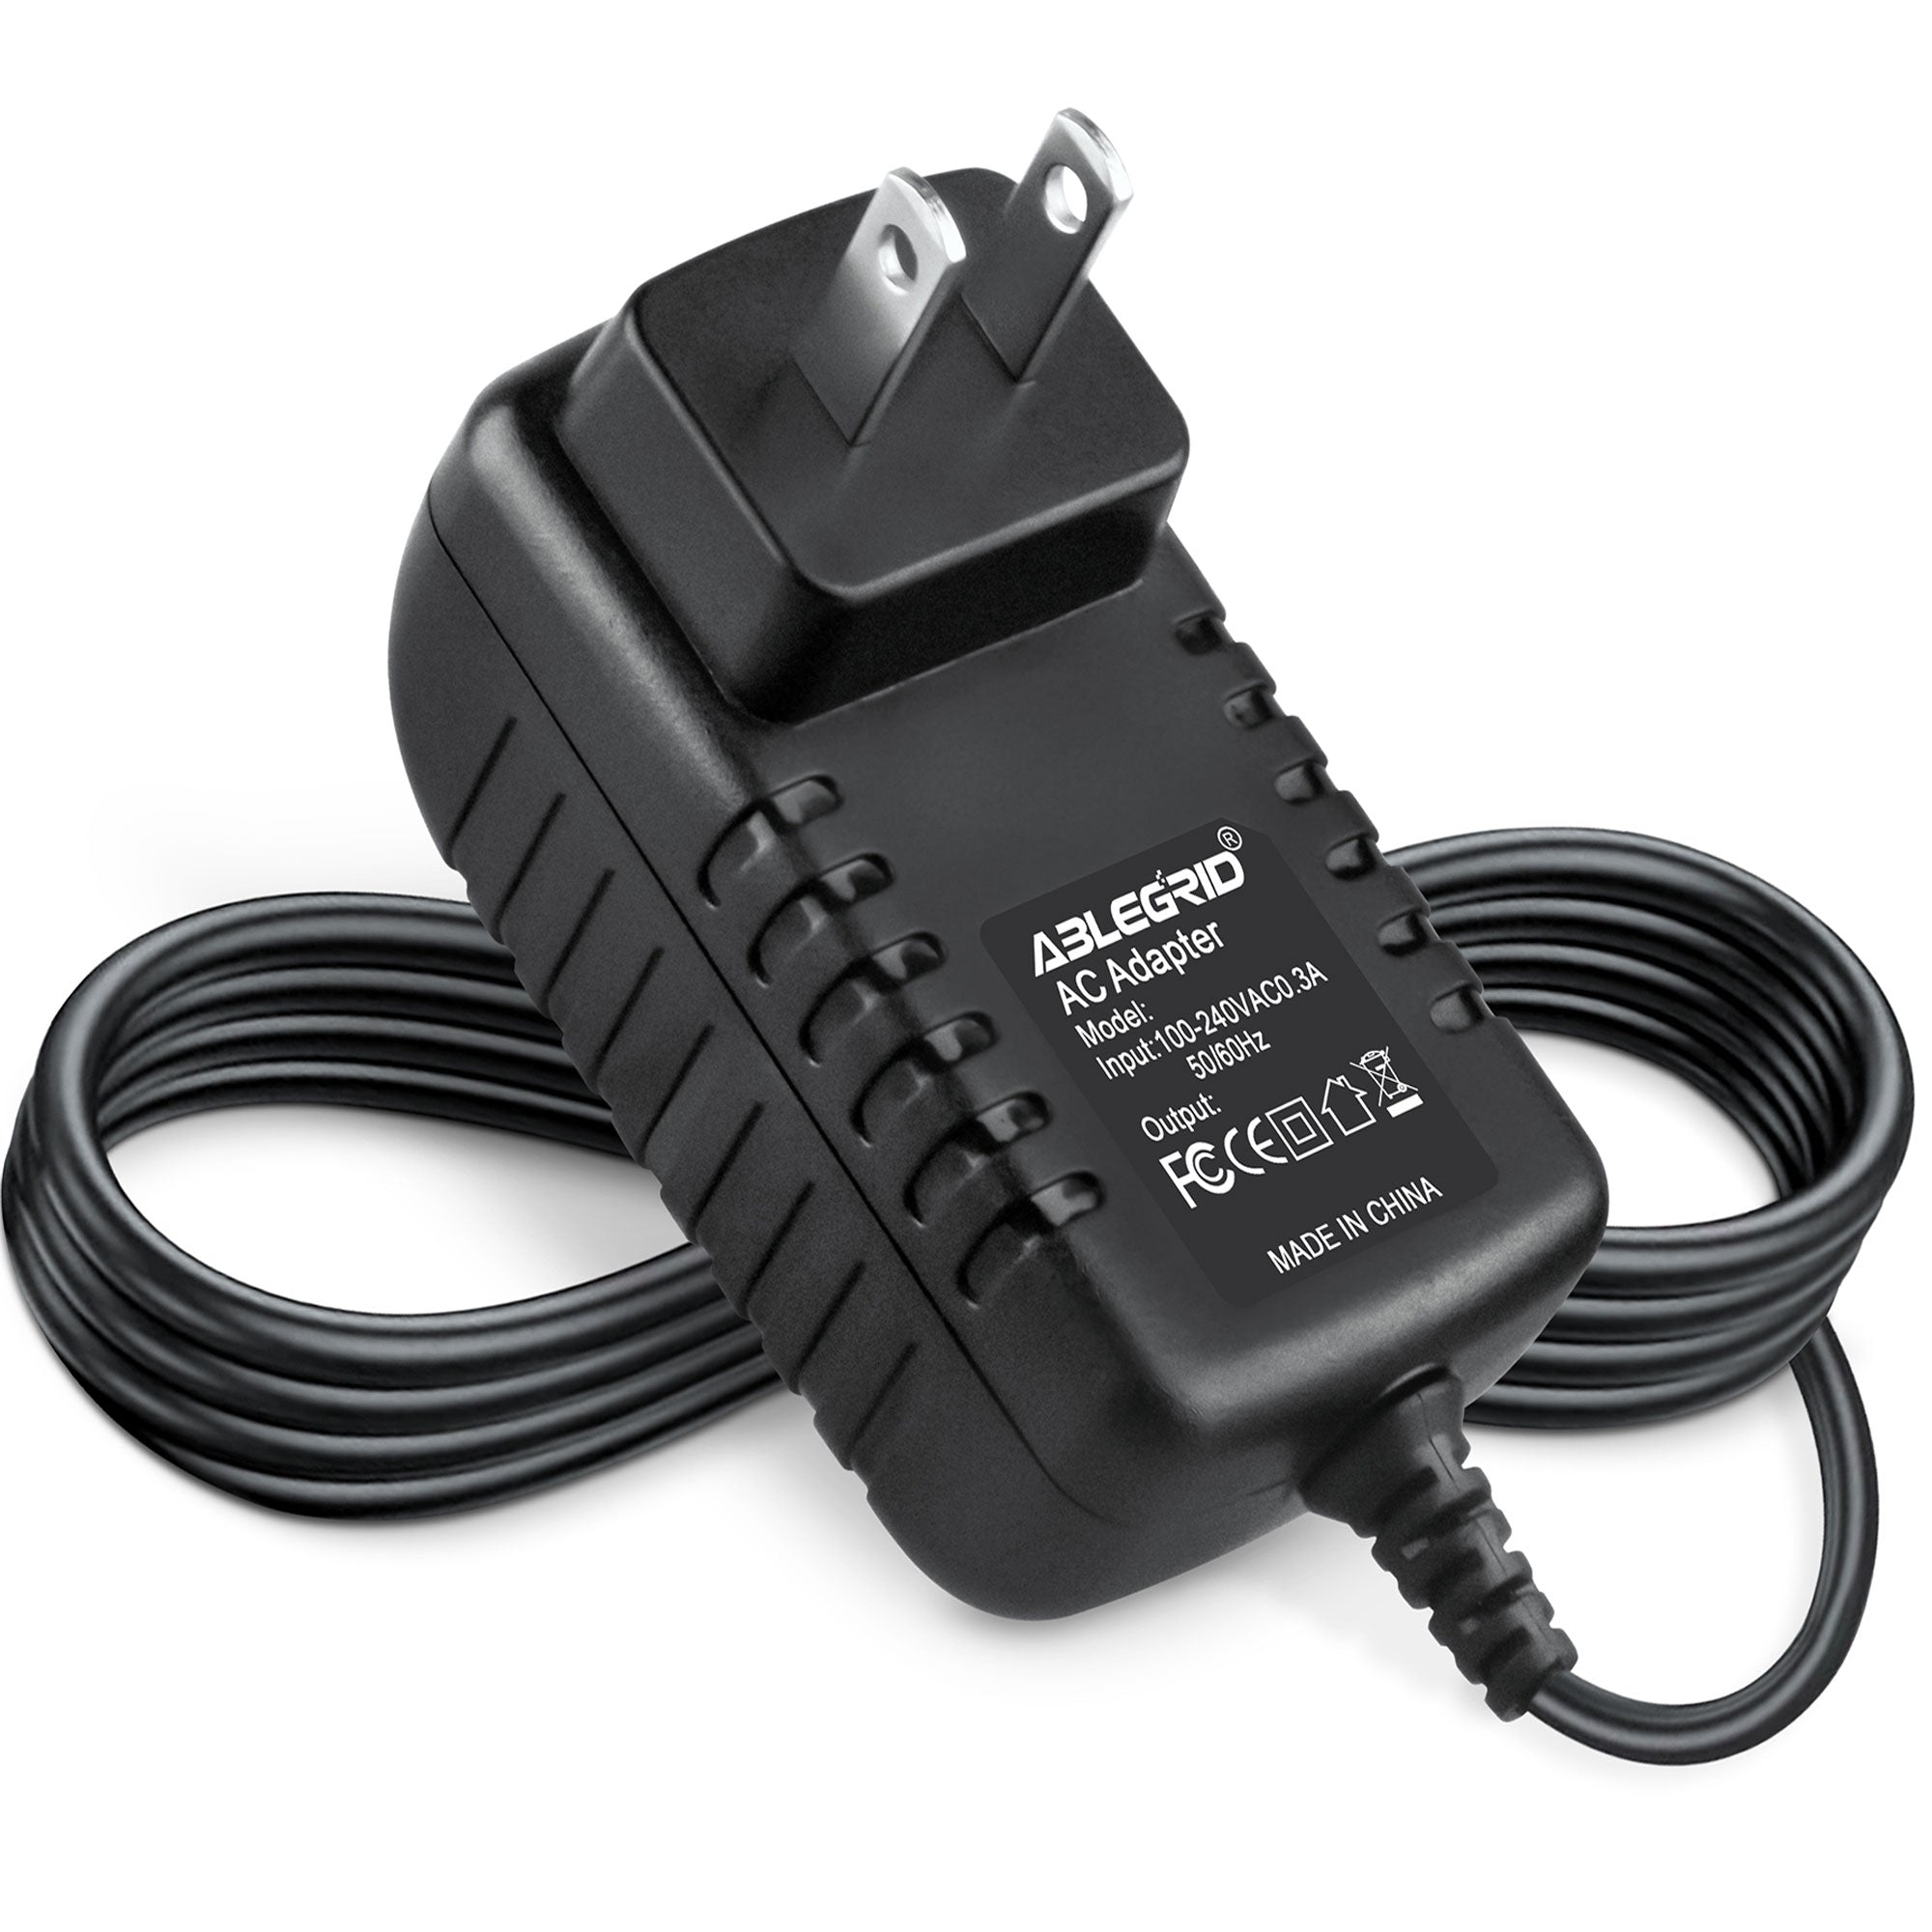 AbleGrid AC-DC Adapter for CELESTRON CPC 1100 CPC1100 CPC 800 CPC800 CPC 925 CPC925 GPS XLT Computerized Telescope Power Supply Cord Cable PS Wall Home Battery Charger Input: 100V - 120V AC - 240 VAC 50/60Hz Worldwide Voltage Use Mains PSU